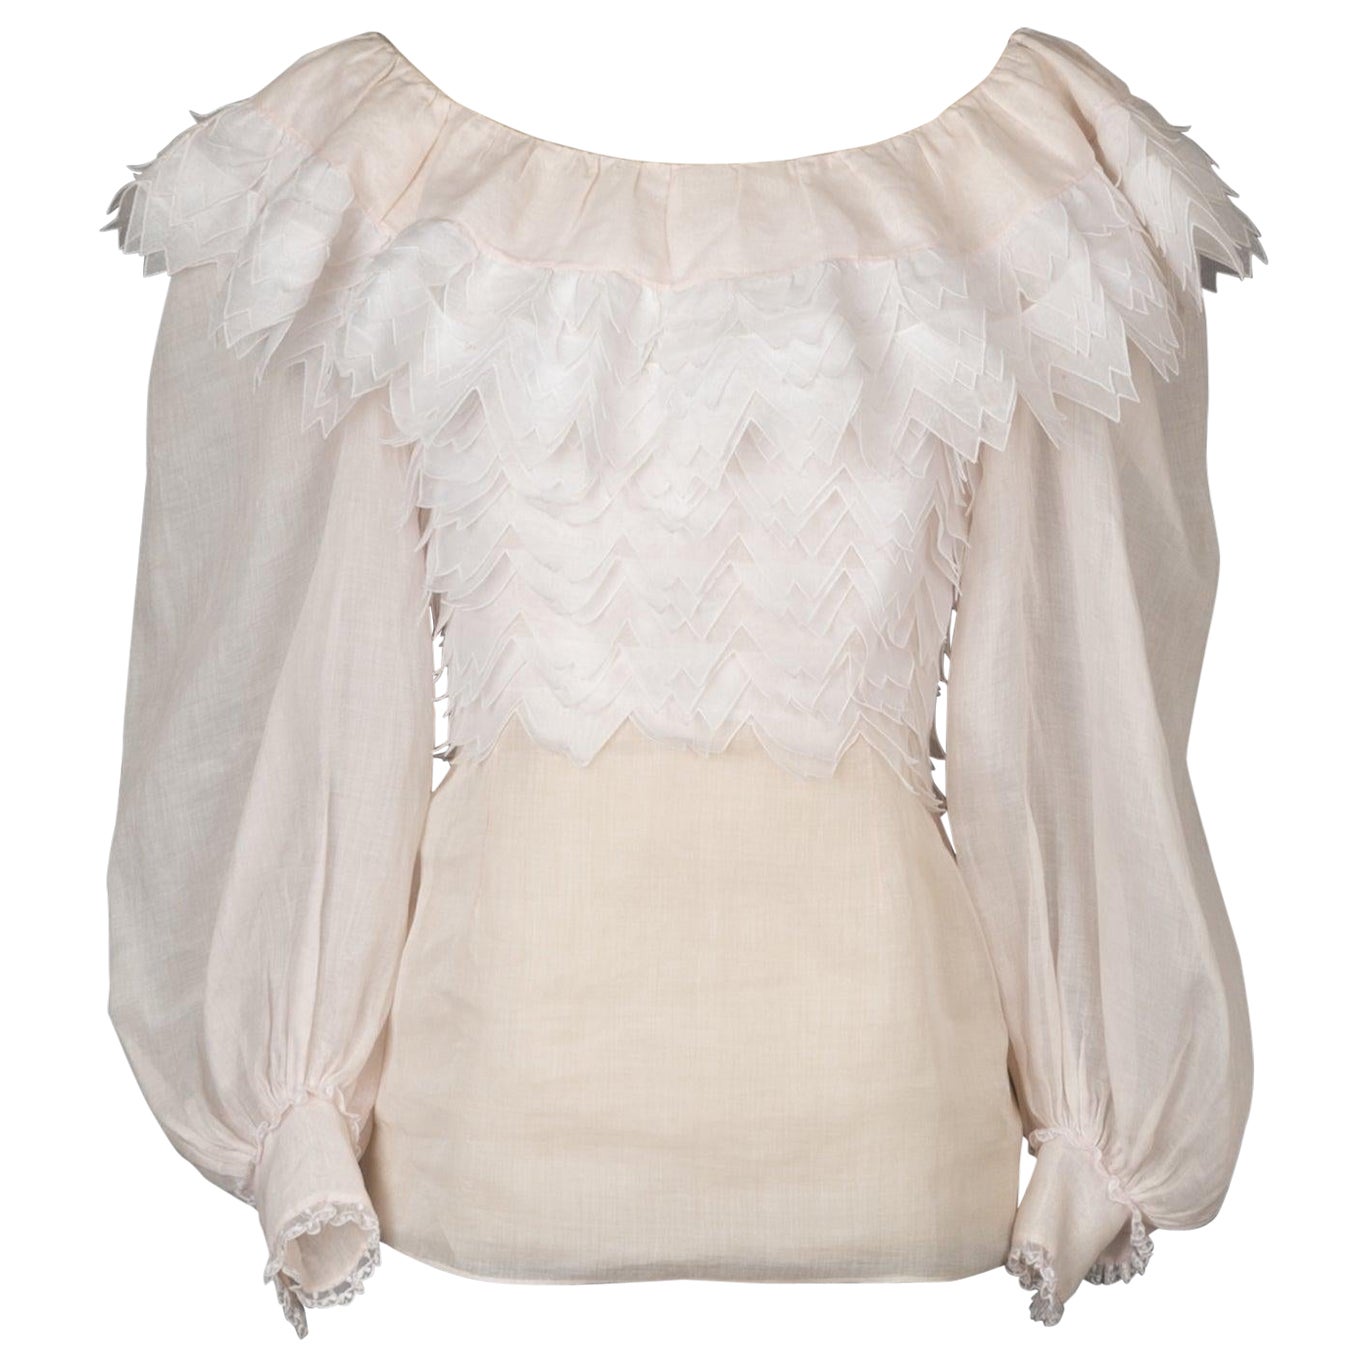 Nina Ricci Flounced Top in White and Pale Pink Tones For Sale